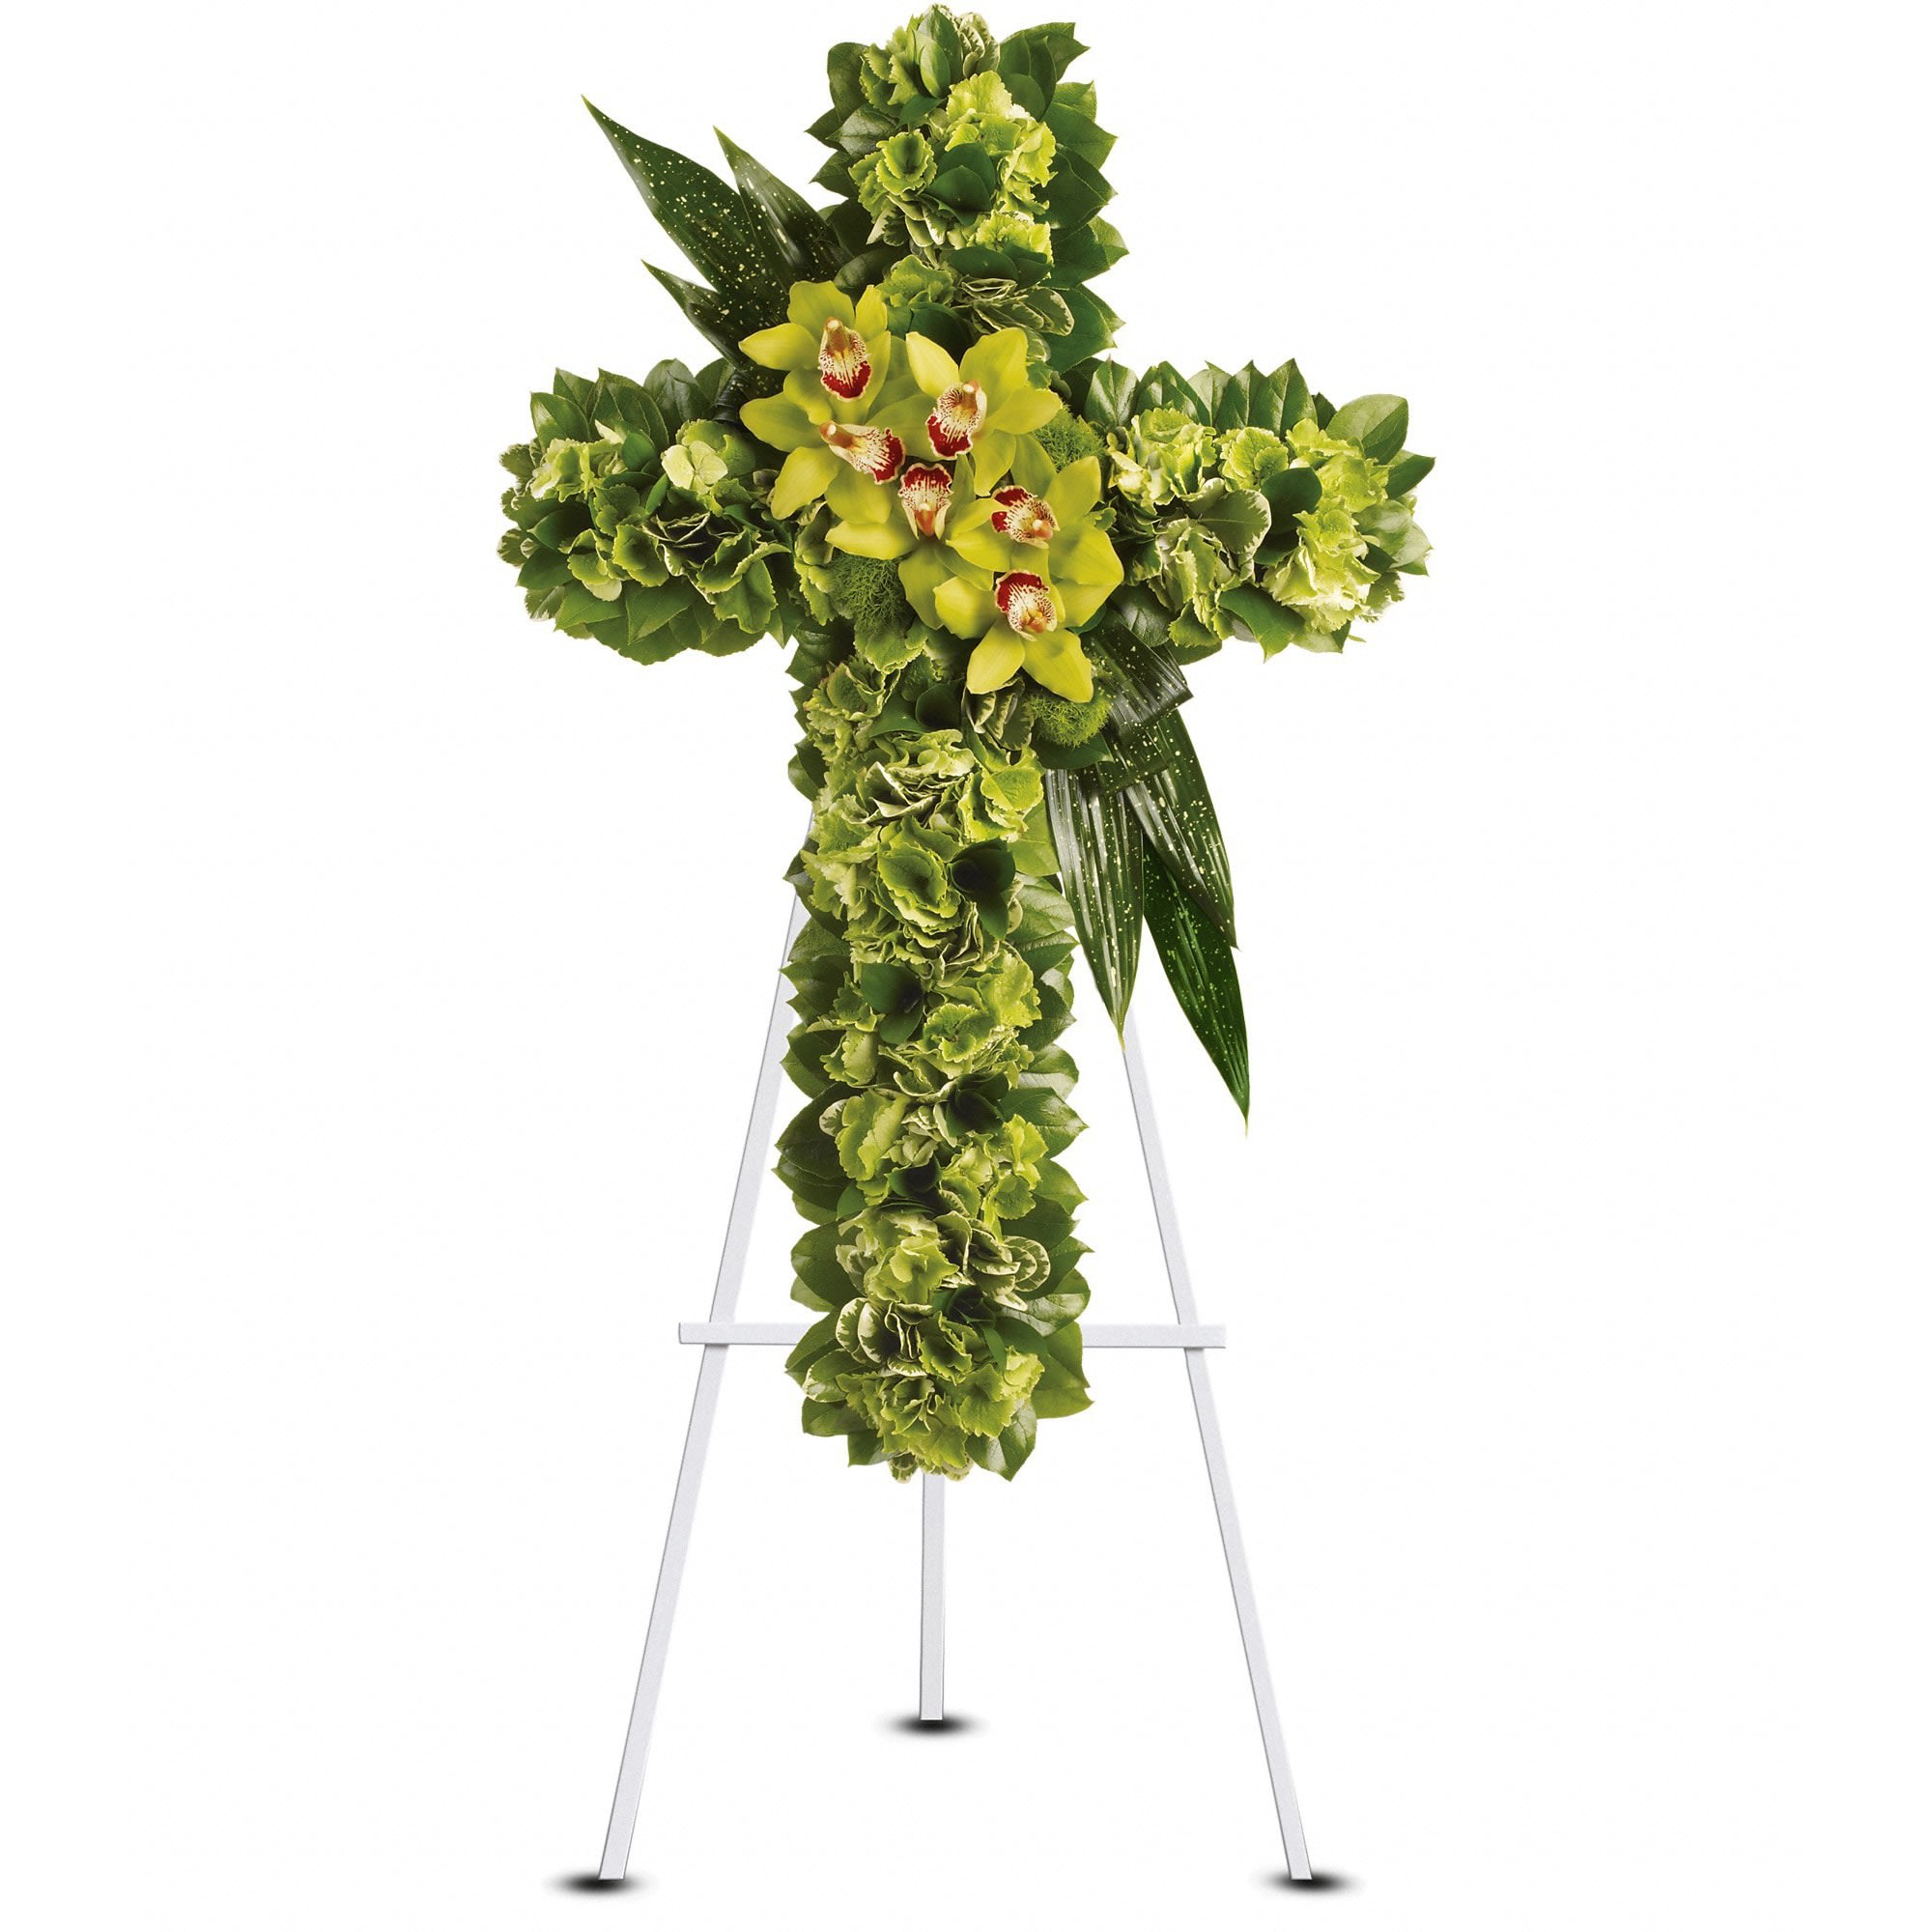 Heaven's Comfort by Teleflora - A life-affirming gift of faith and hope is always appreciated in a family's darkest hours. This elegant cross delivers that message in a way that will touch many hearts.  